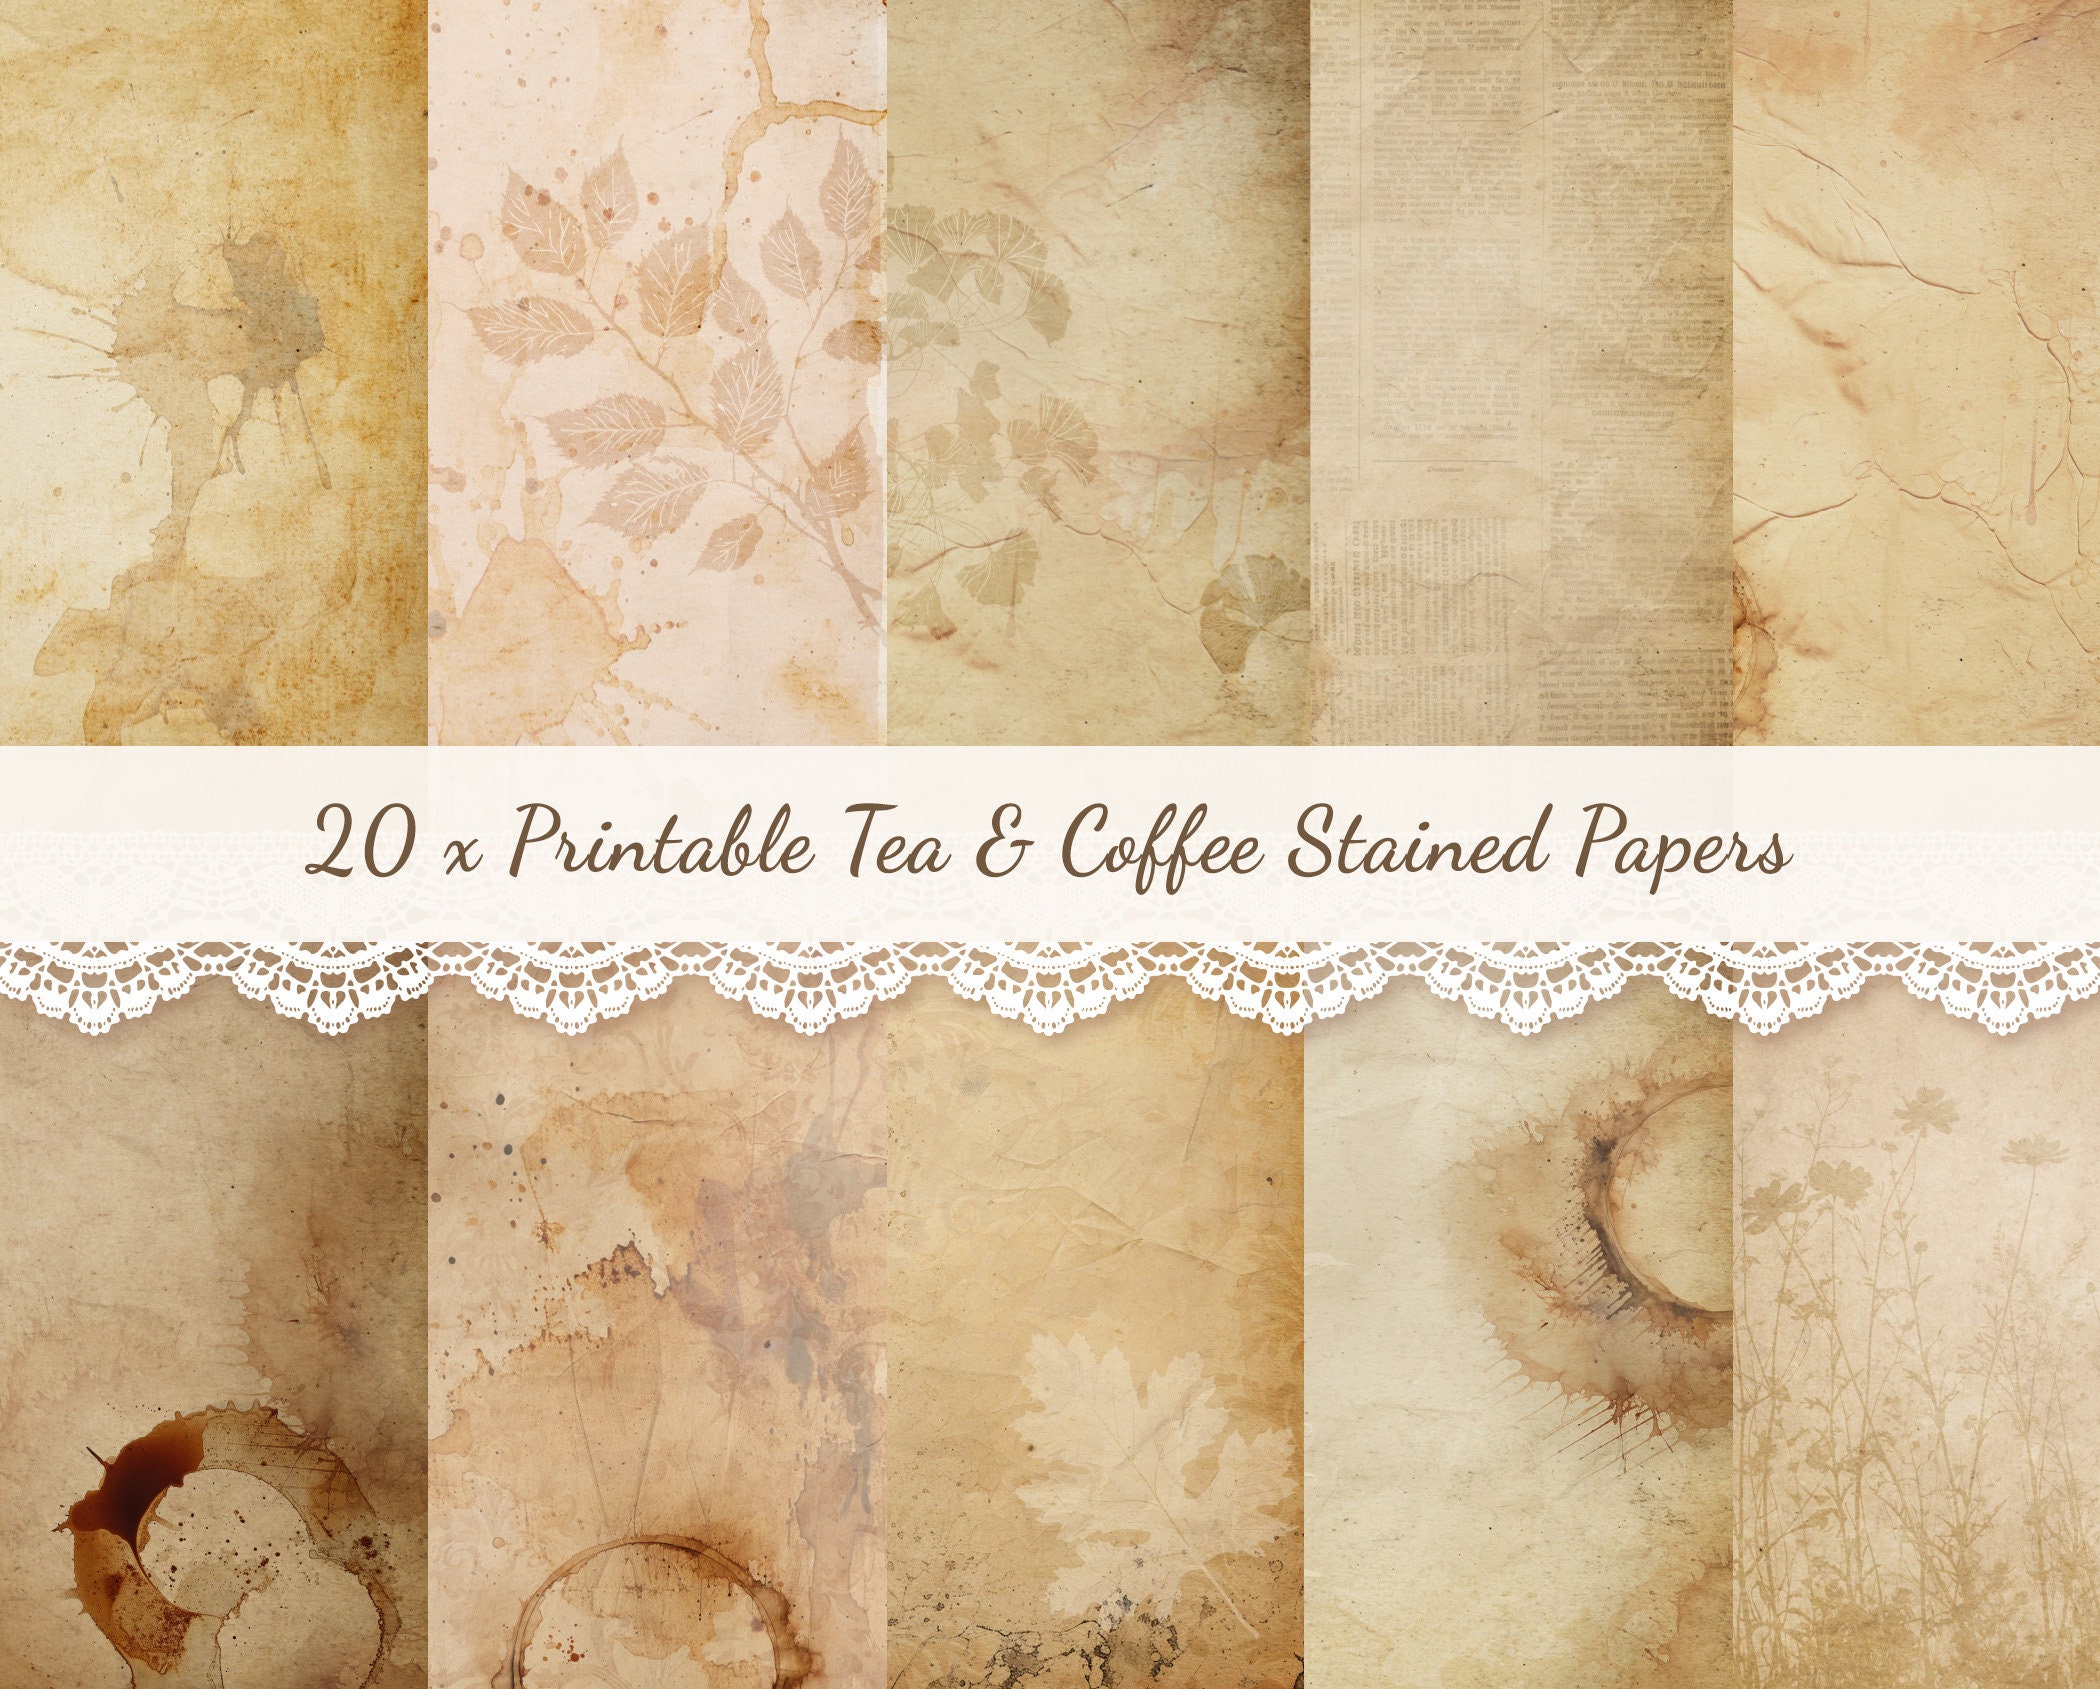 Aged Paper, Old Vintage Printable Paper Pack, Coffee Dyed, Tea Stained,  Junk Journal Paper, Antique, Scrapbook, Collage, Digital Download 